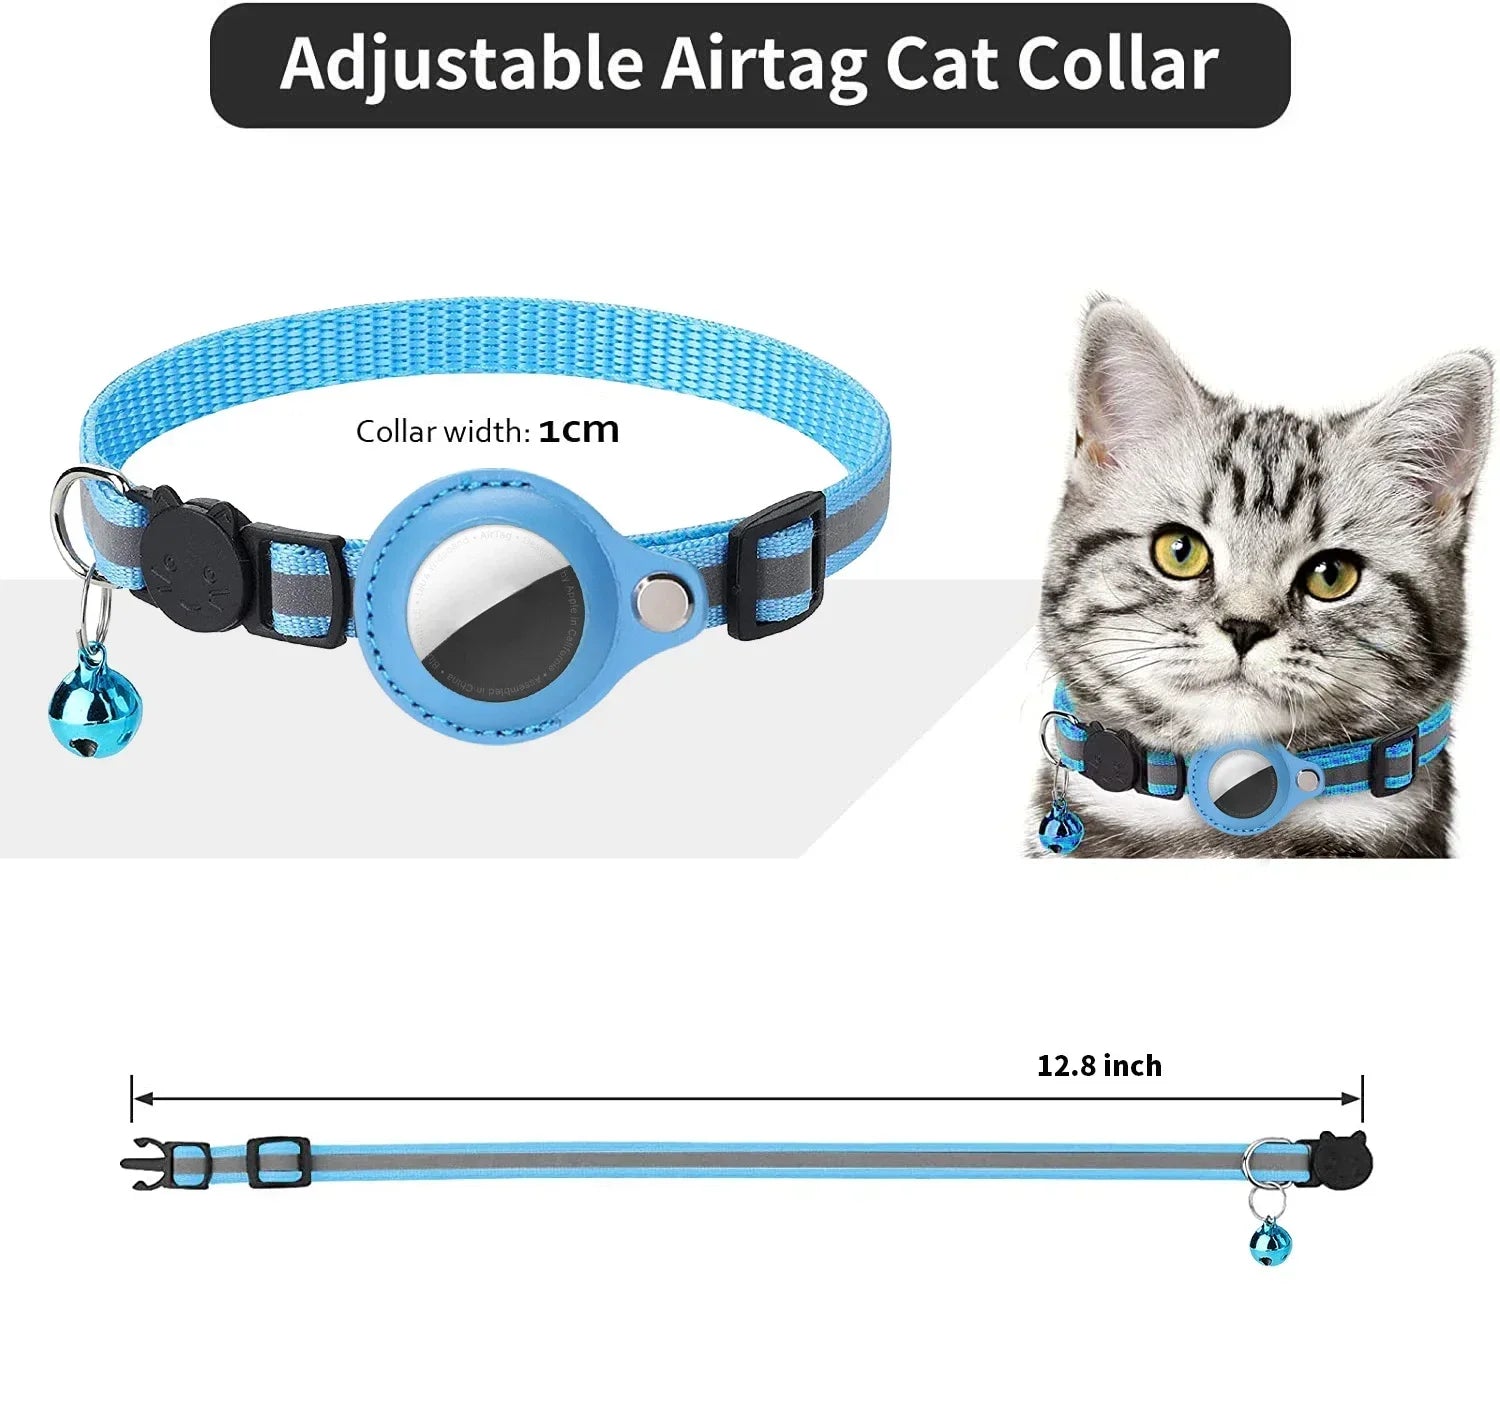 Anti-Lost Cat Collar for Airtag GPS Tracker Protective Case With Bell Reflective Cats Necklace Kitten Accesories Pet Products